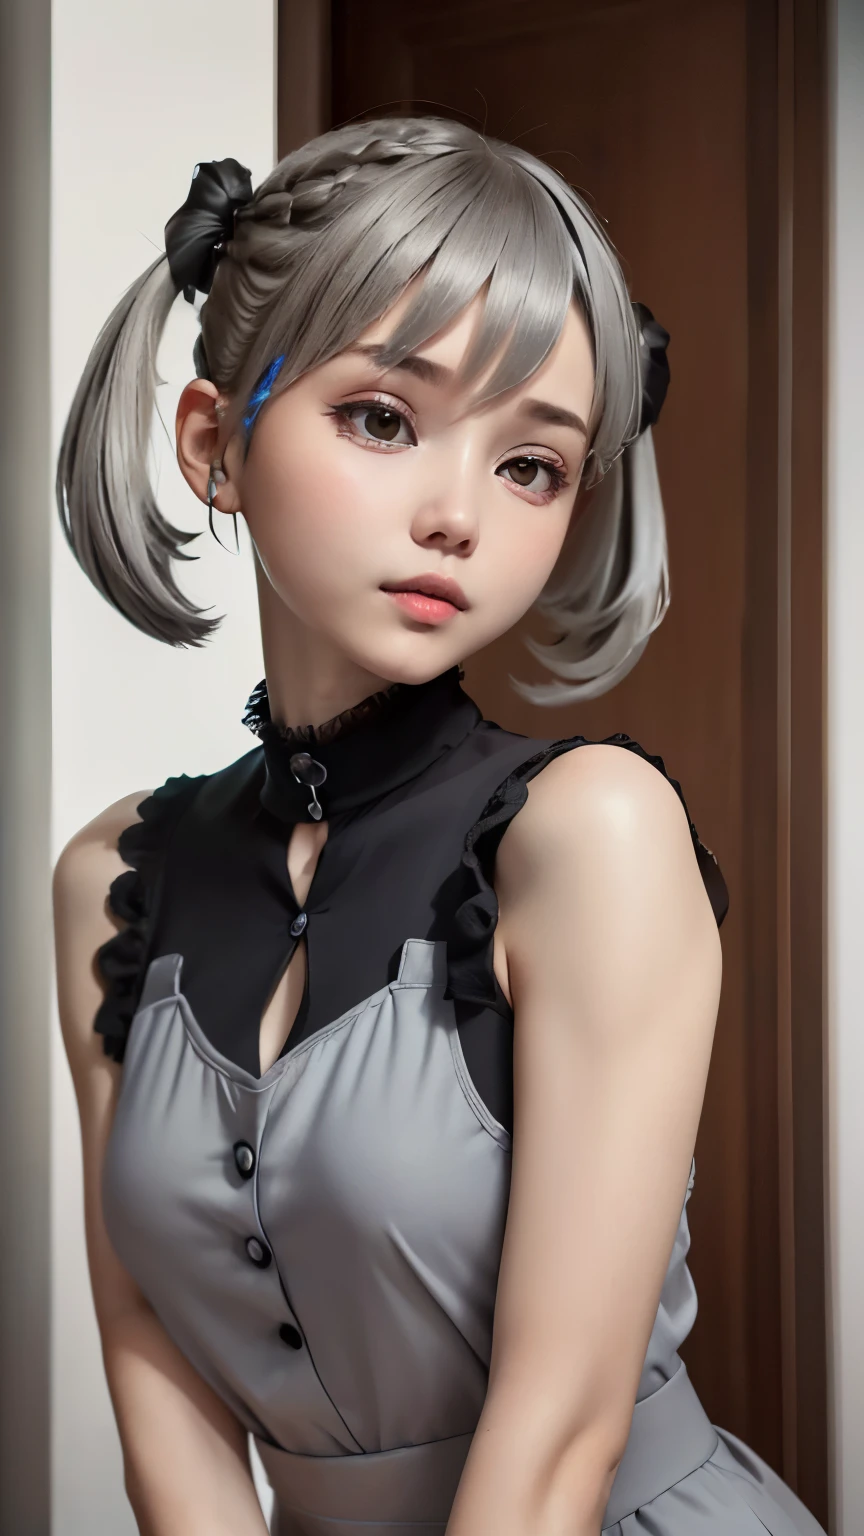 ((wallpaper 8k)), ((surreal)), ((Quality with attention to detail:1.2)), 1 girl, １４talent、kind eyes、plump lips、Ash gray hair、An ennui look、(((small breasts、small breasts)))、black classy dress,Black capelet, look up, Widespread poverty, (((short cut hair、short hair twintails、Ash gray hair:1.5)))、white skin